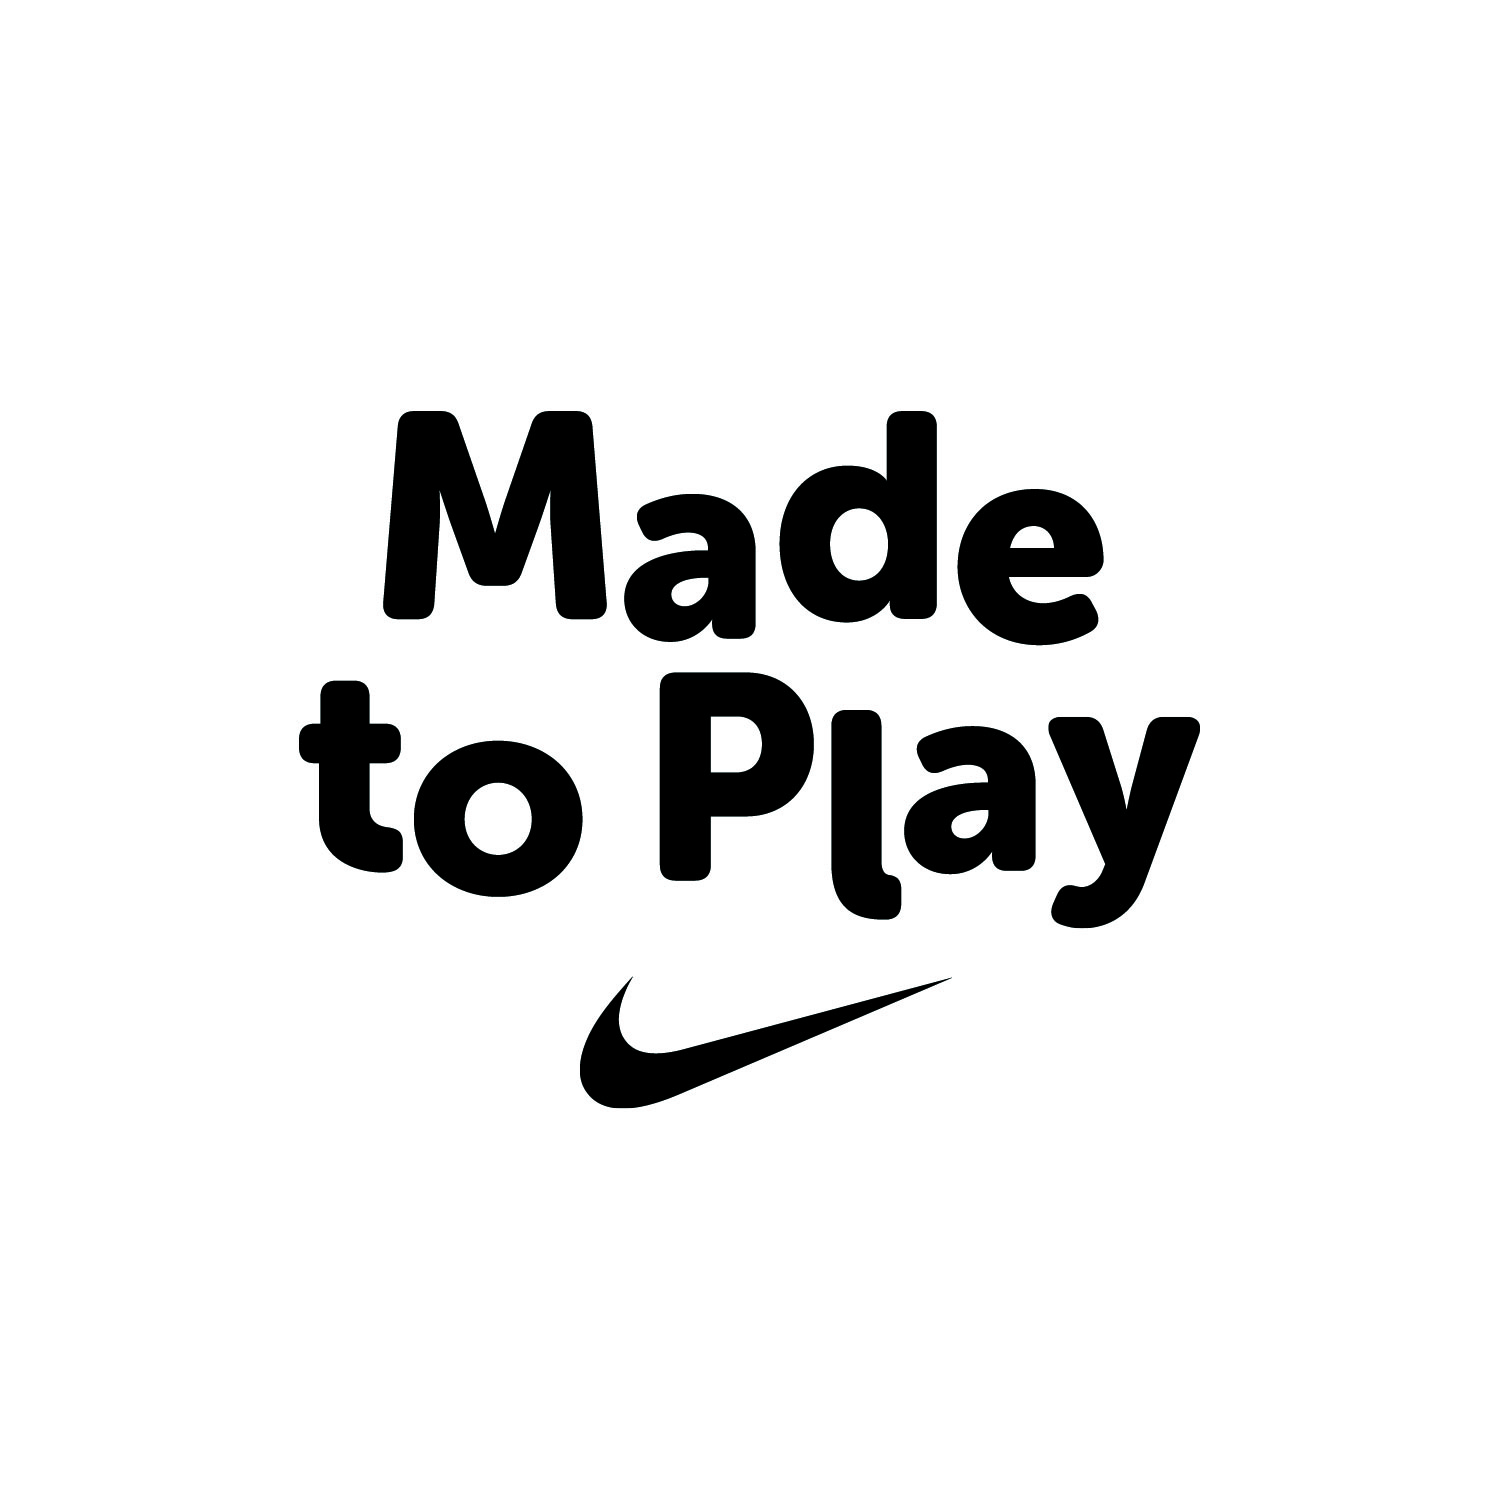 Made to play